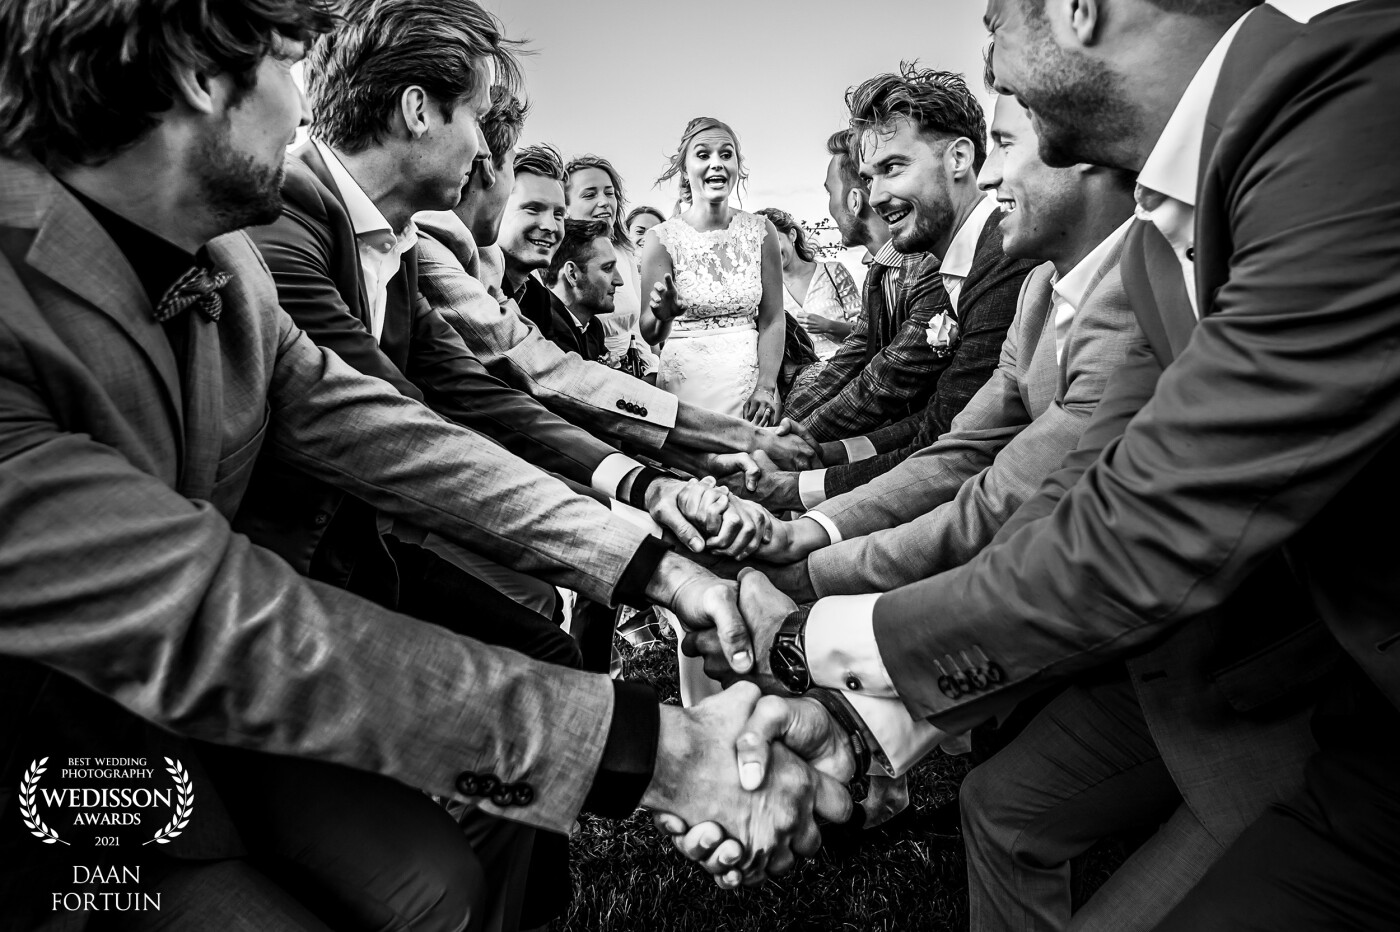 Sometimes things go wild during the group photos...flying brides and grooms... I always love these moments... Are you guys going to catch me ?